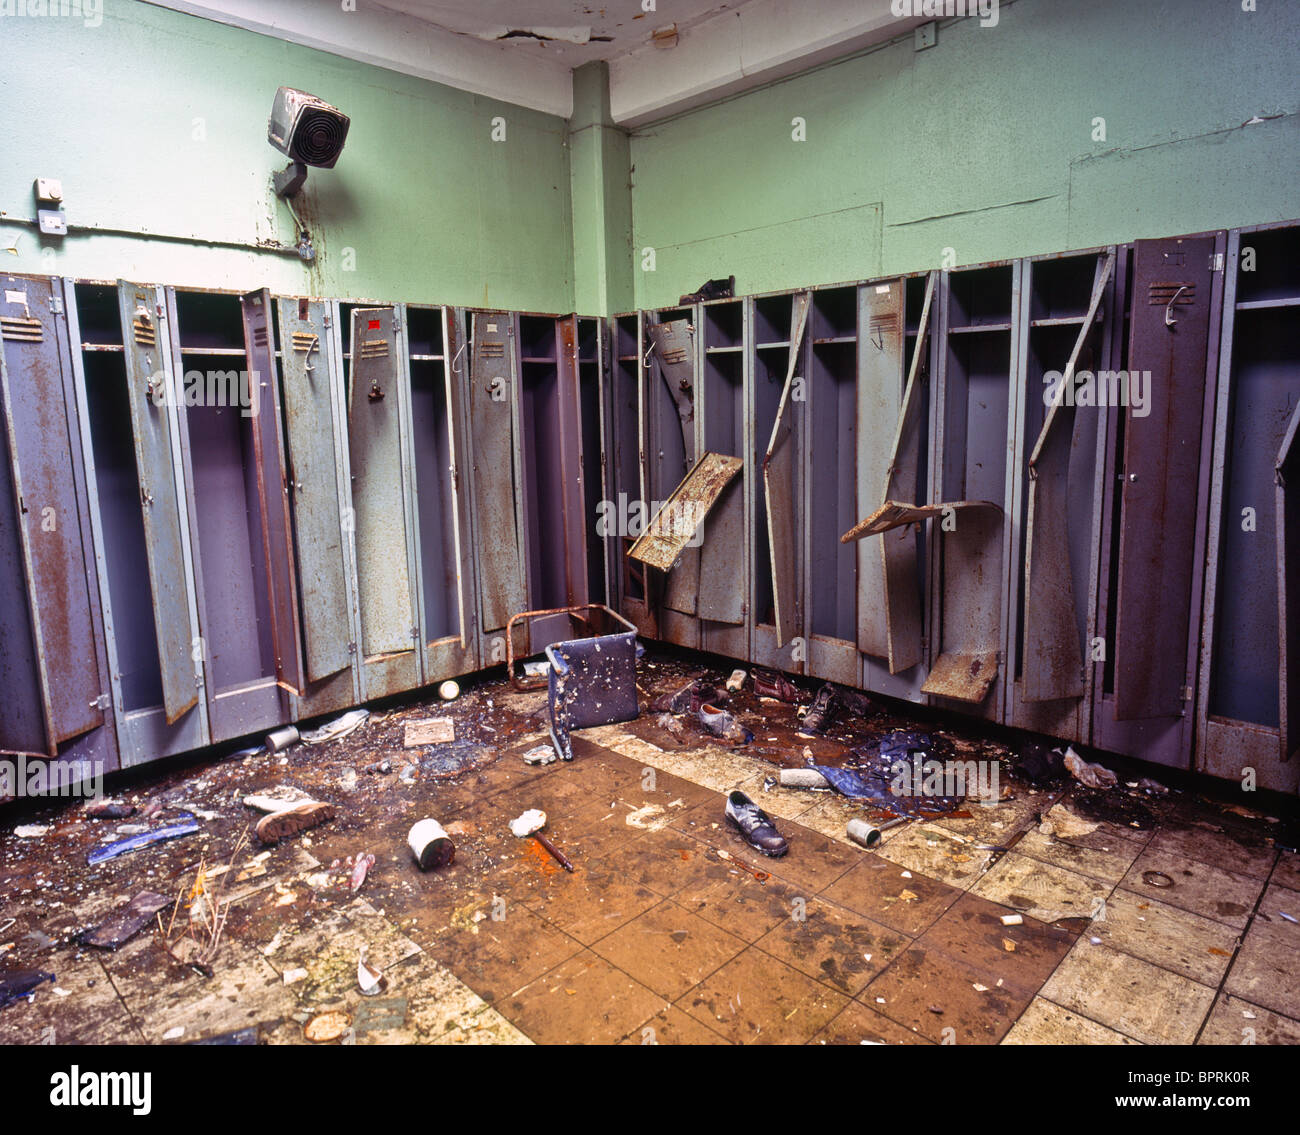 a-derelict-messy-old-abandoned-locker-room-at-abm-louth-lincolnshire-BPRK0R.jpg